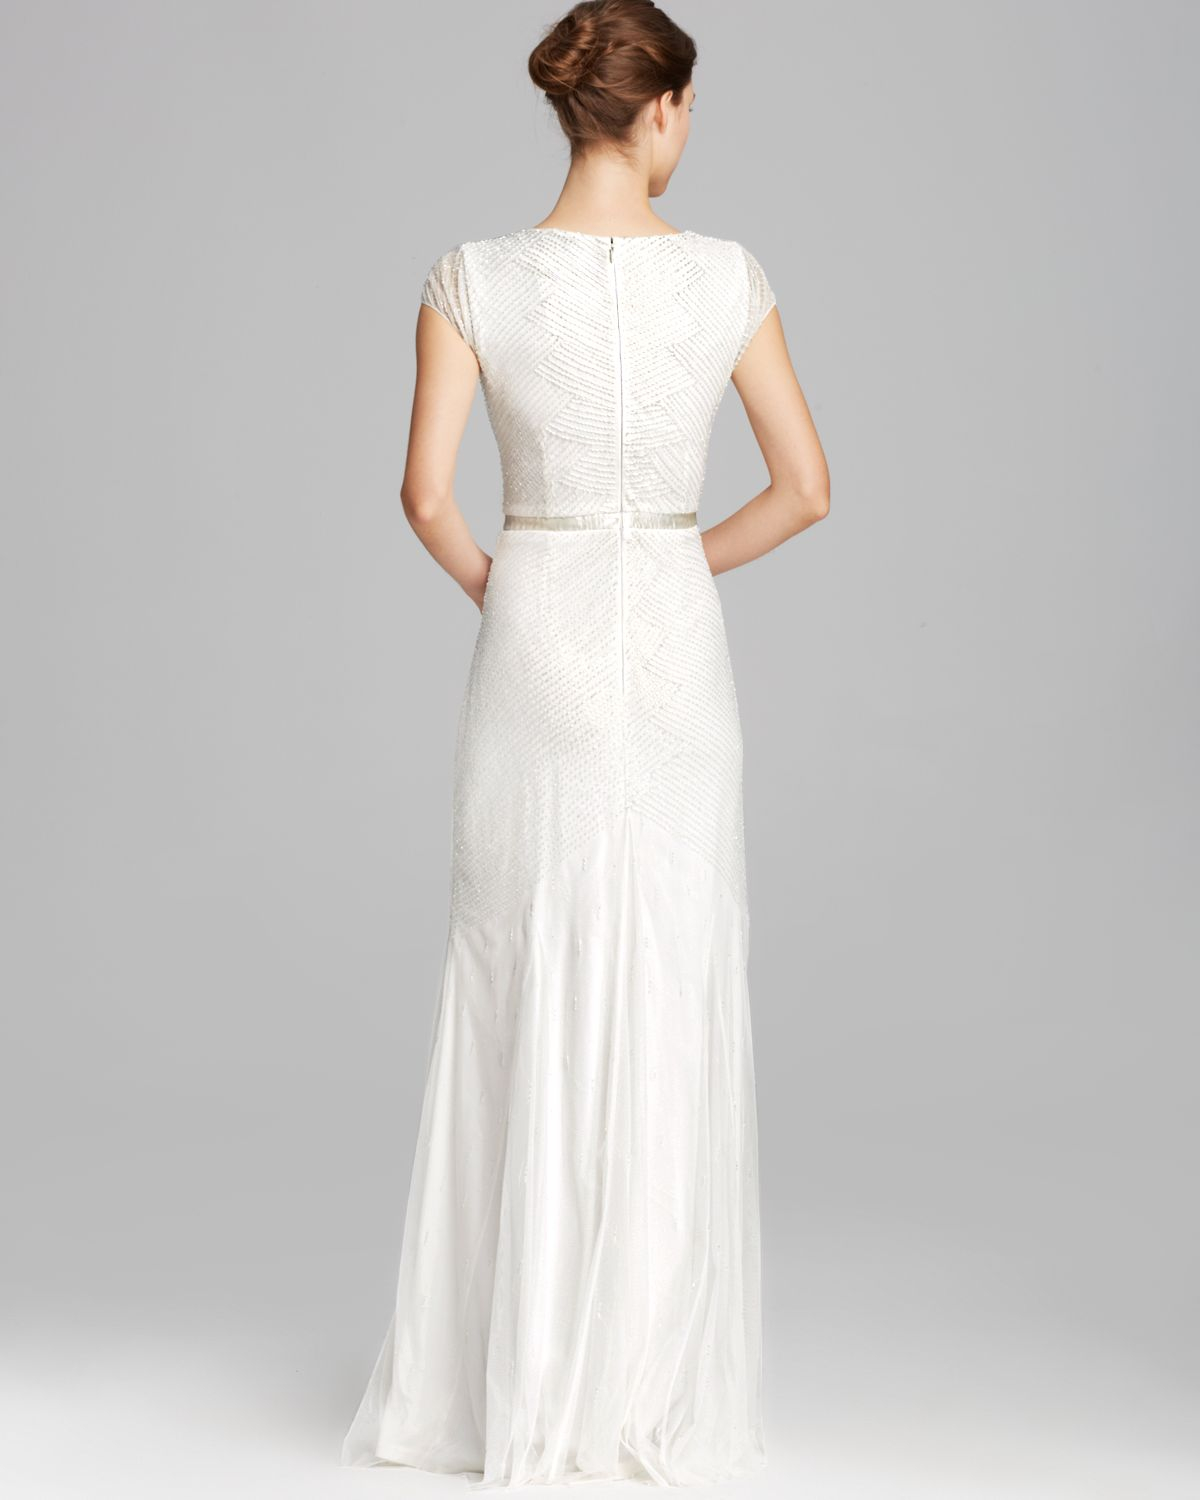 Adrianna Papell Gown - Cap Sleeve V ...